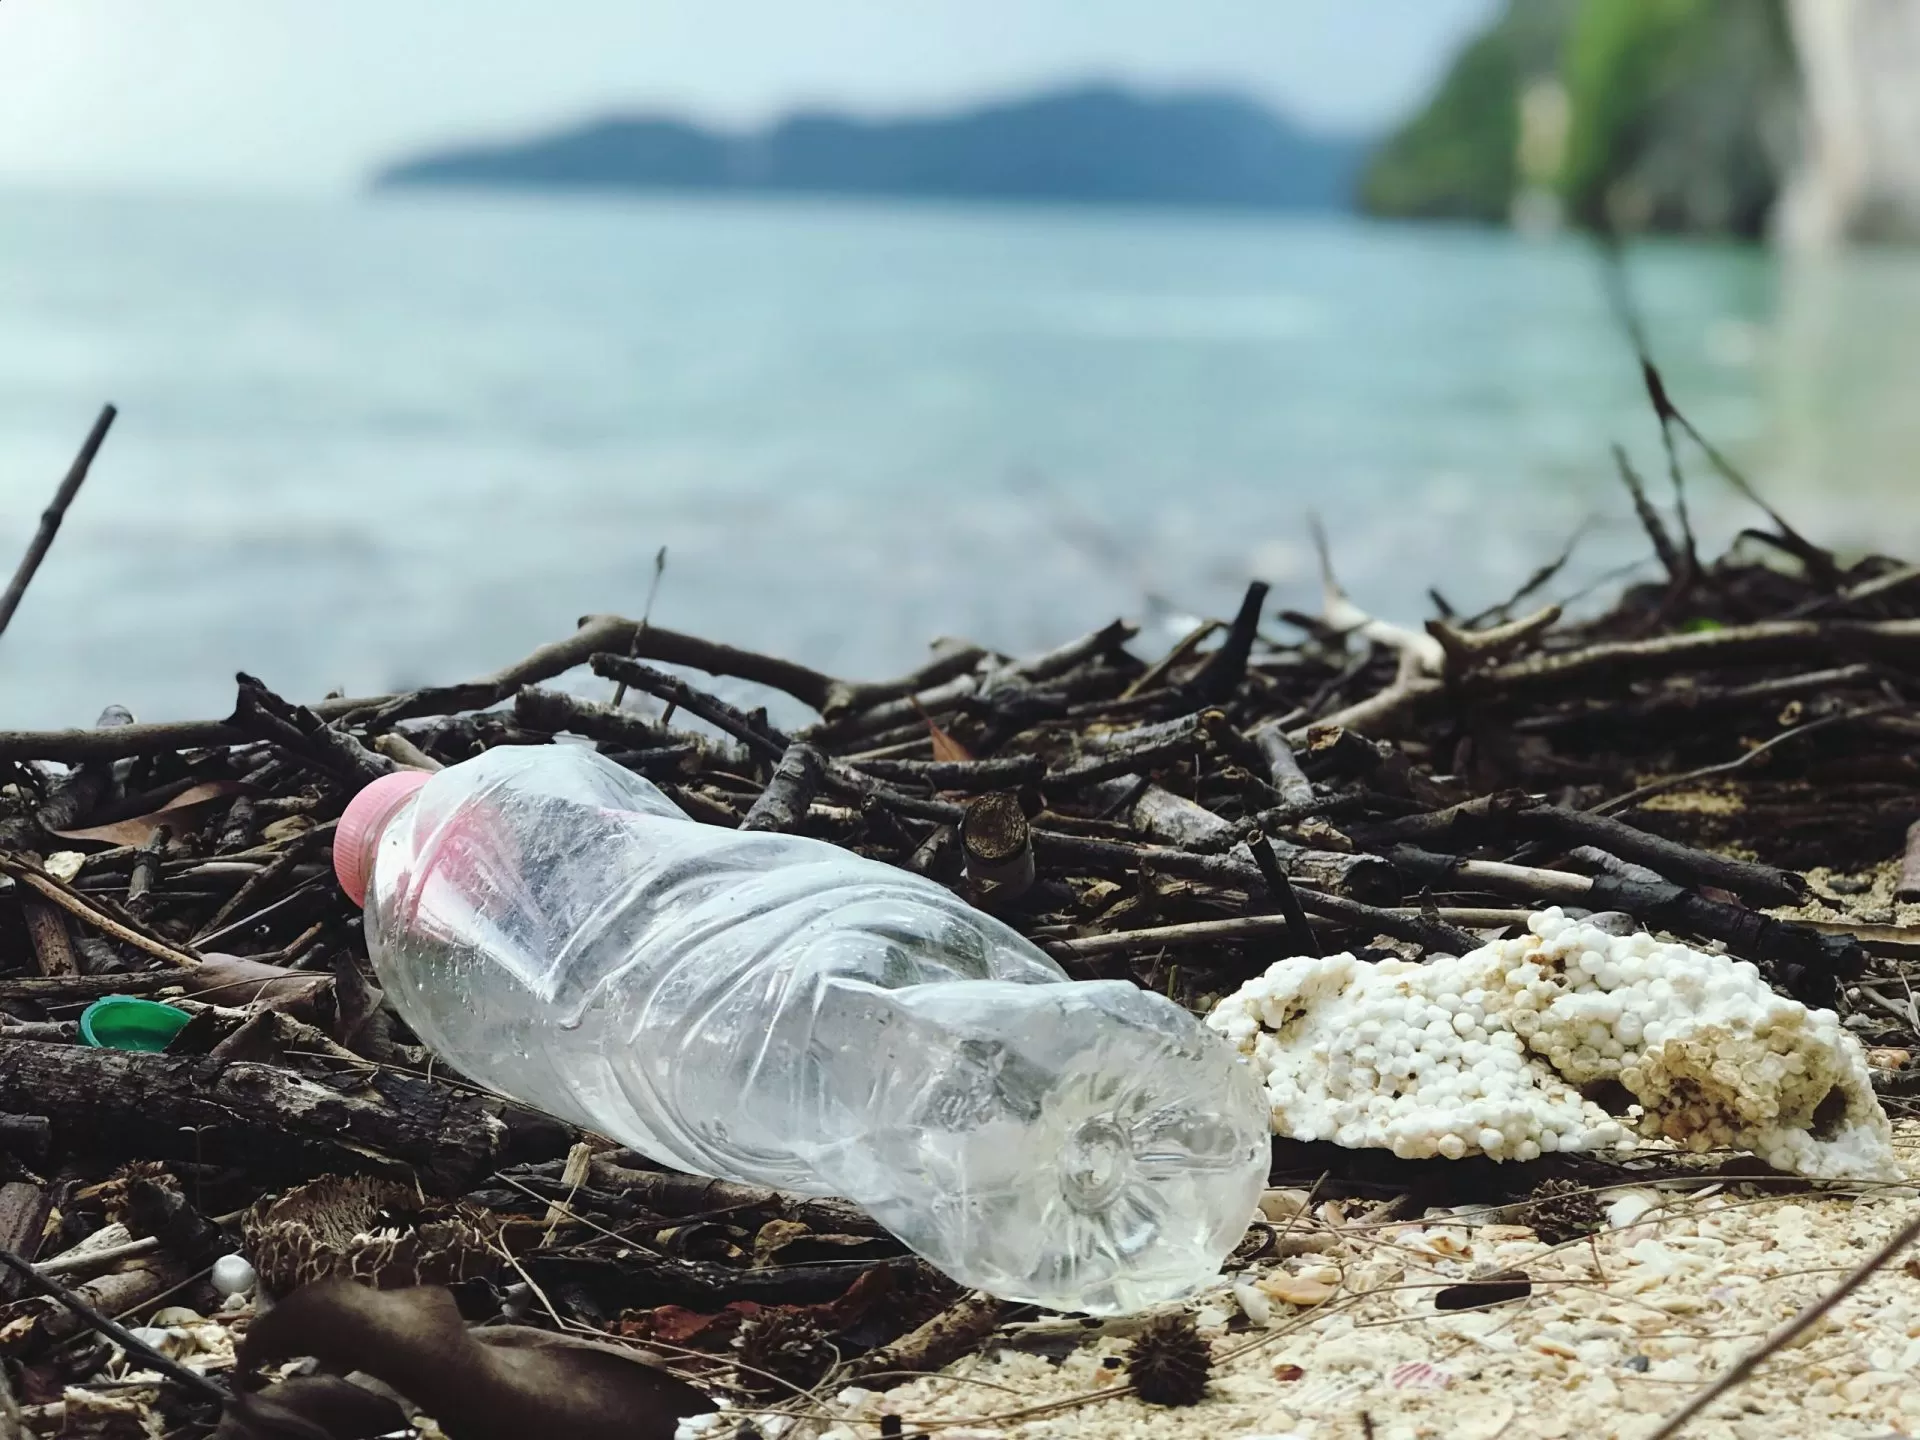 Single-use plastic bottles are destroying our oceans and beaches